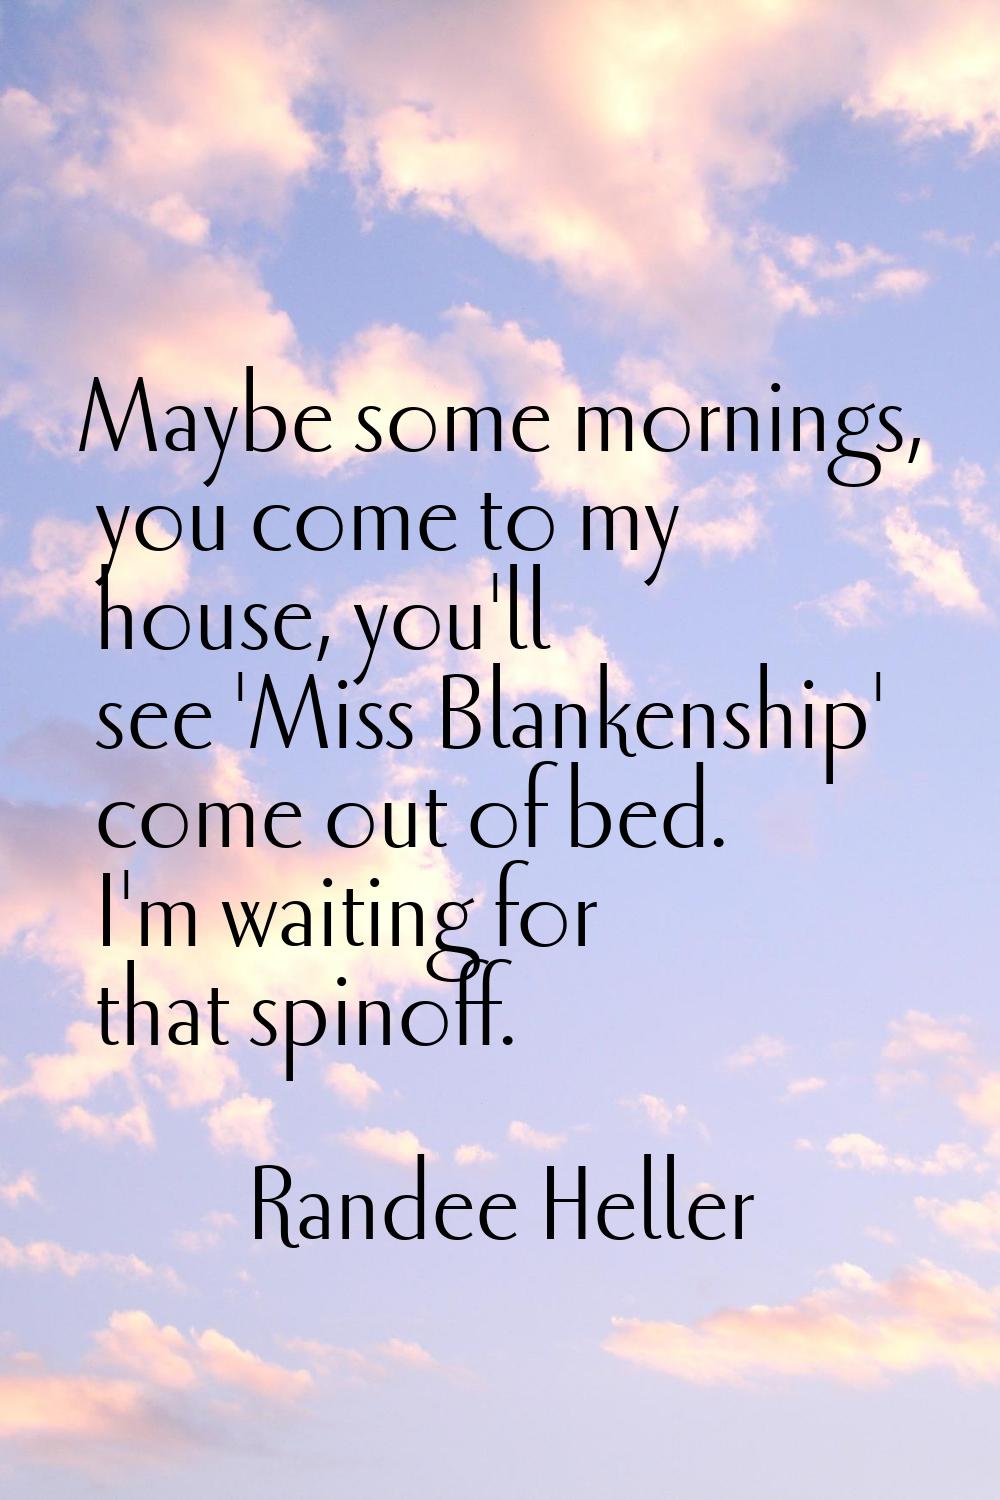 Maybe some mornings, you come to my house, you'll see 'Miss Blankenship' come out of bed. I'm waiti